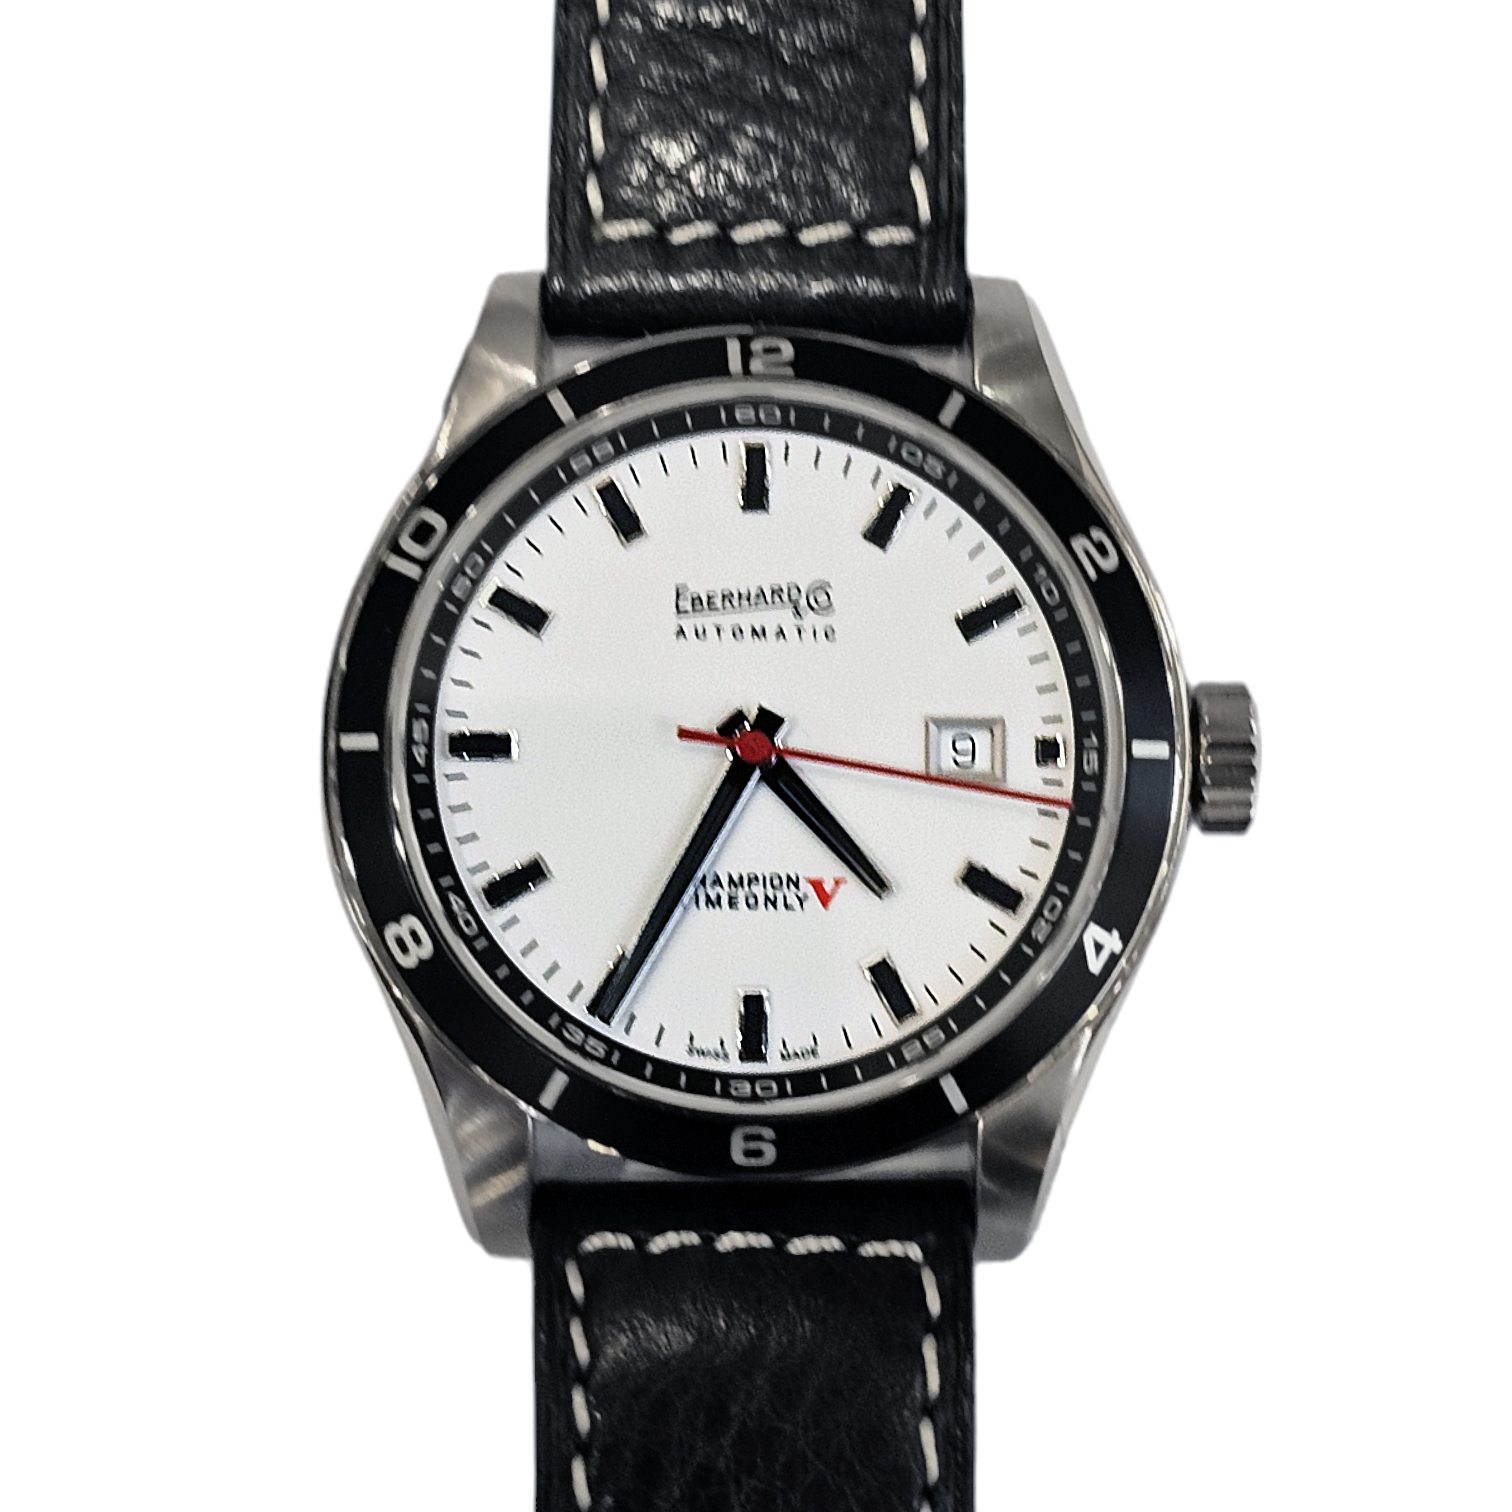 Eberhard & Co. Champion V Timeonly Ref. 41031CP - ON6056